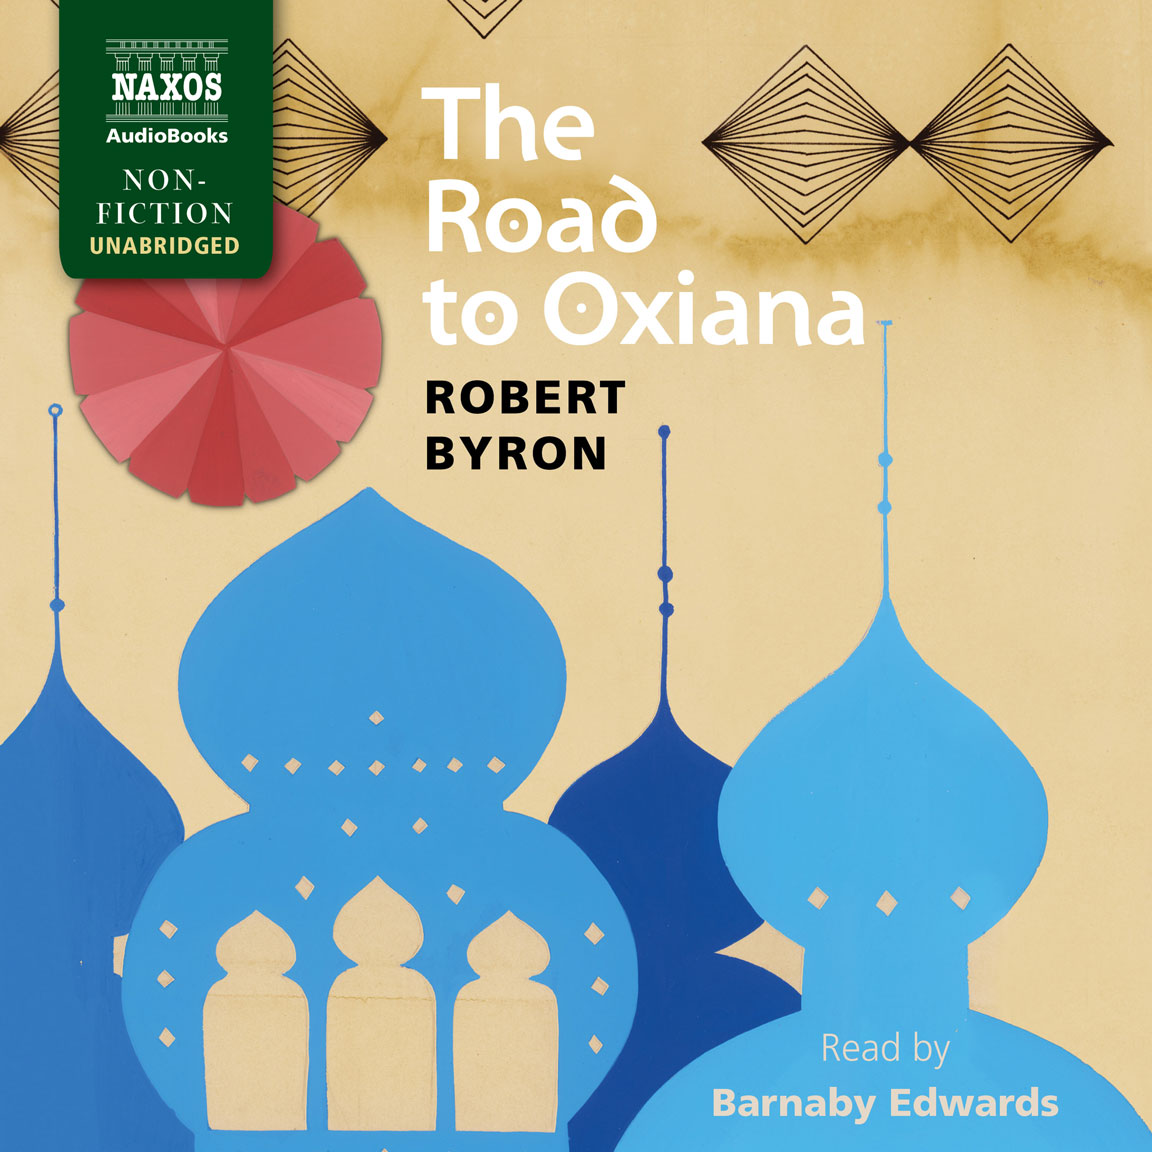 The Road to Oxiana (unabridged)